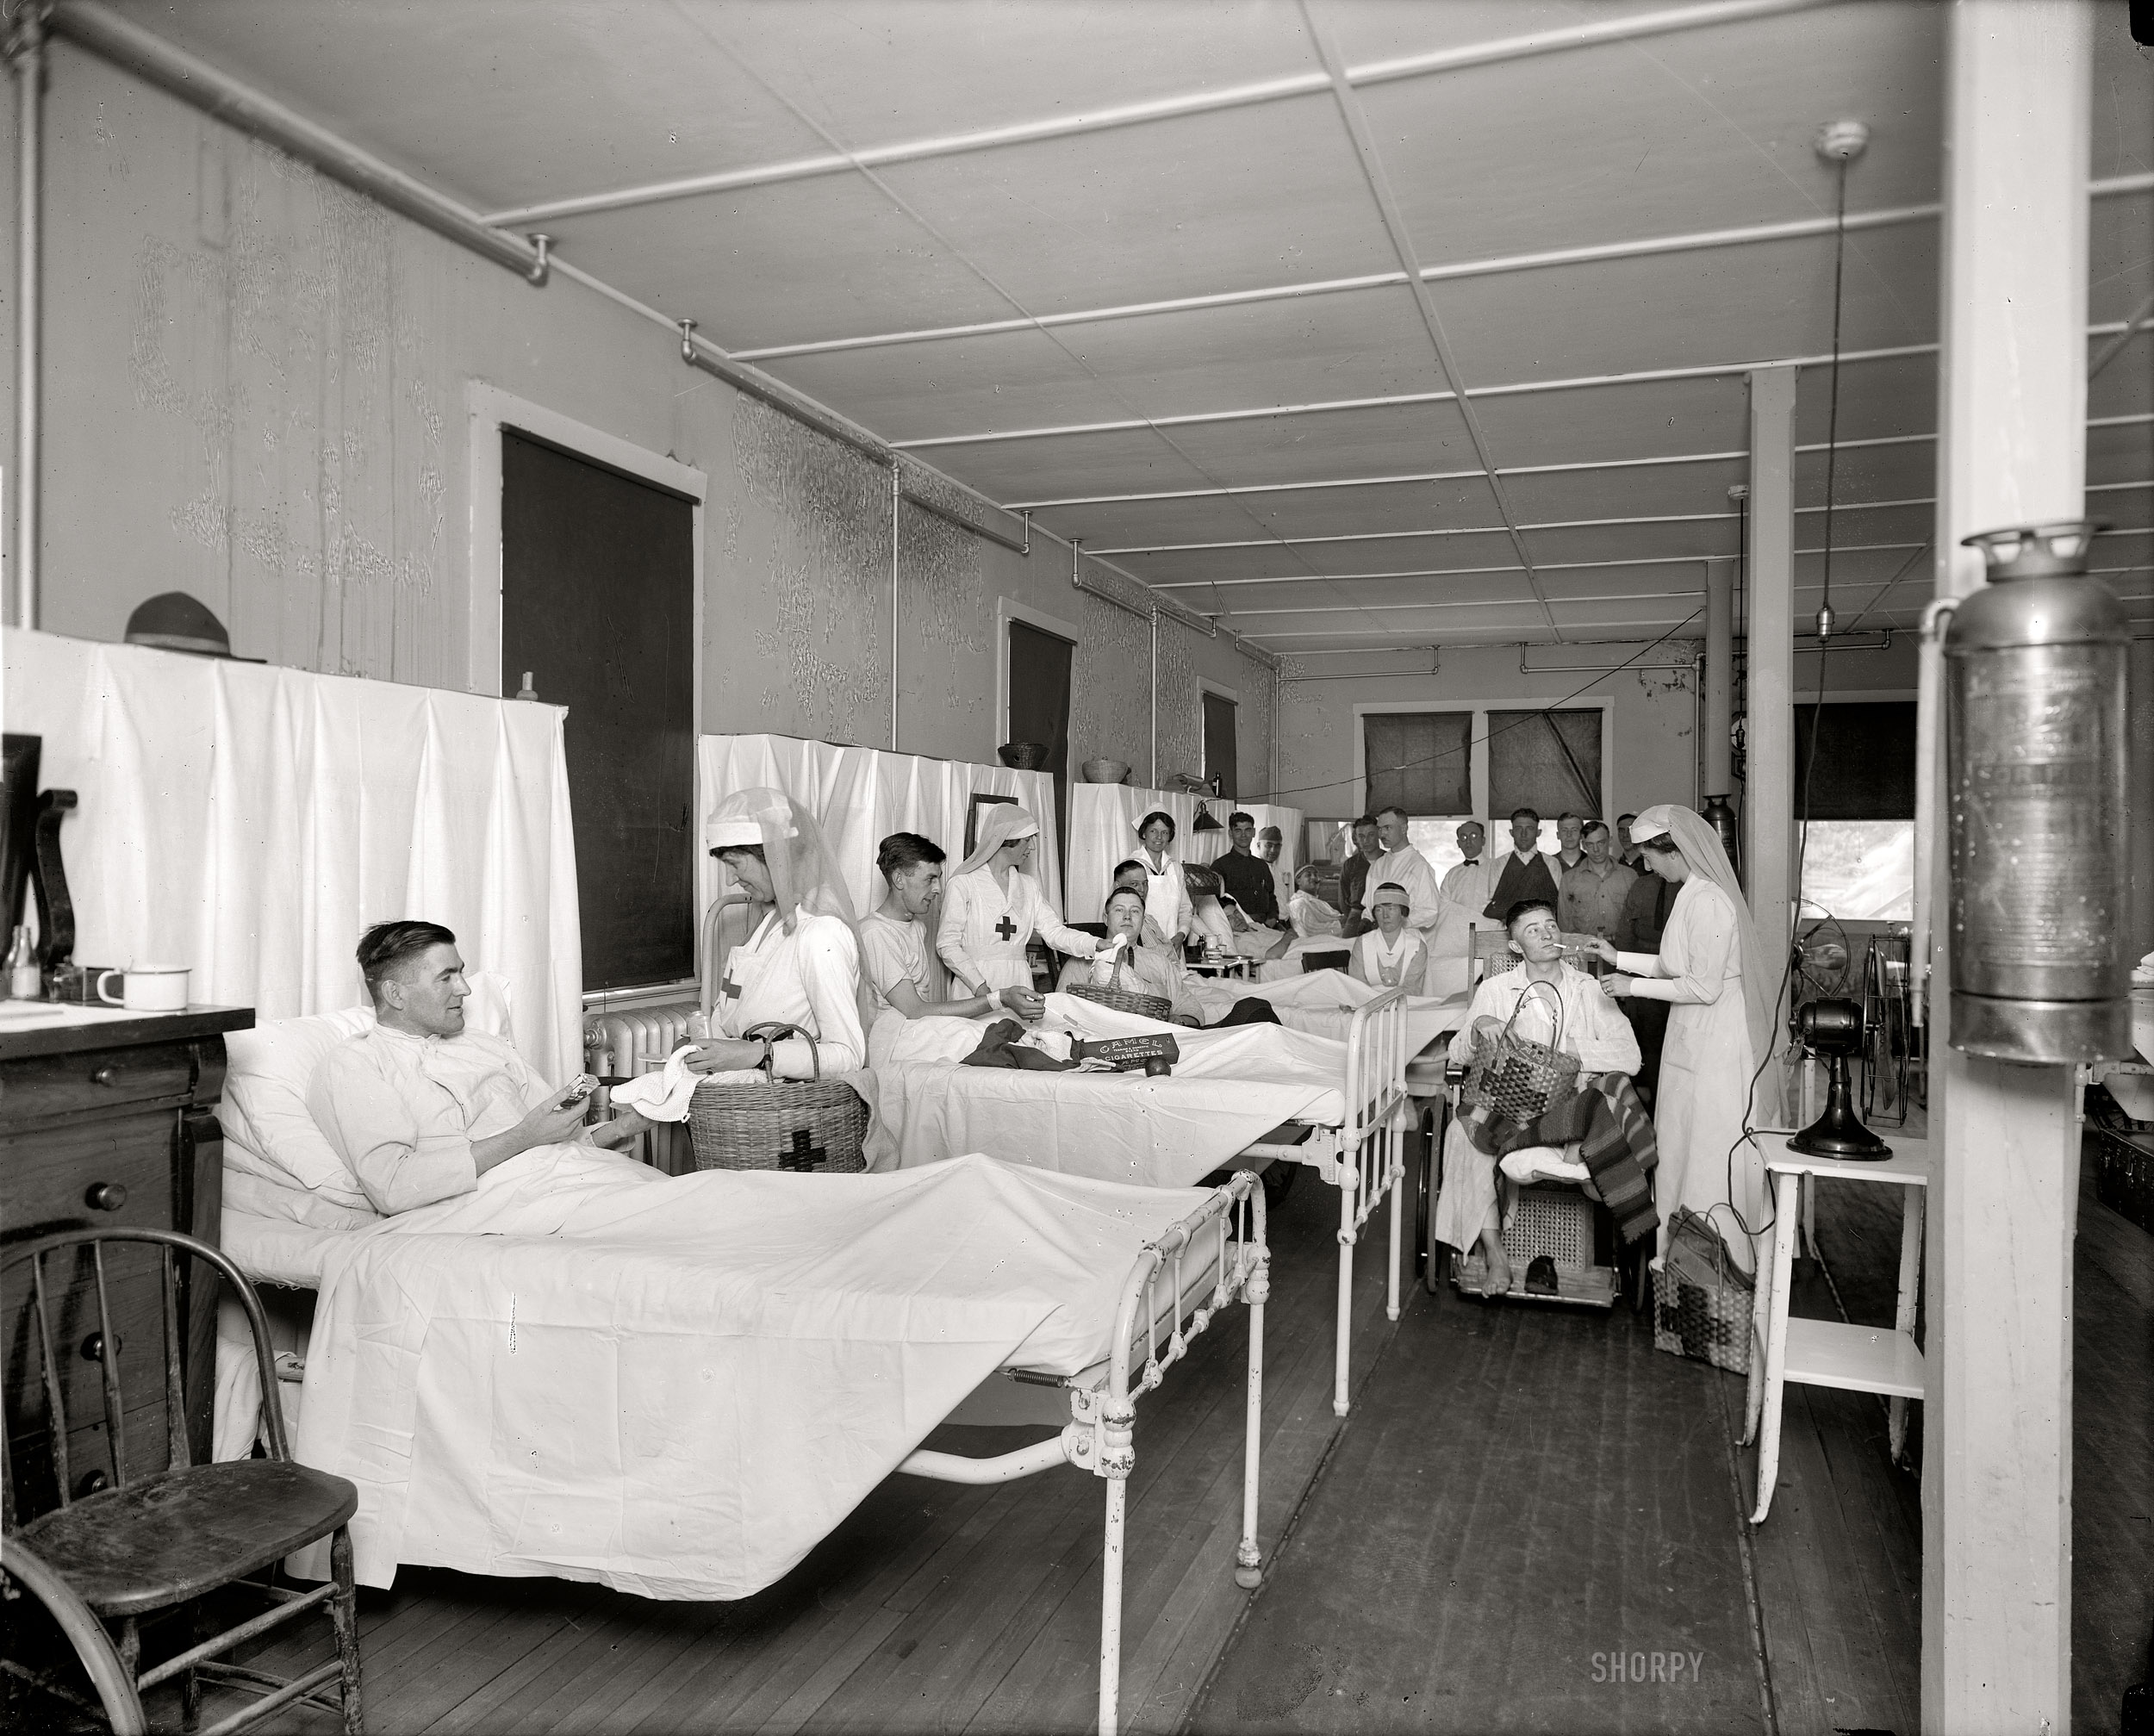 Washington, D.C., circa 1918. "Red Cross activities at Walter Reed Hospital." Cigarettes for the wounded back from the trenches of Europe. Harris & Ewing Collection glass negative. View full size.